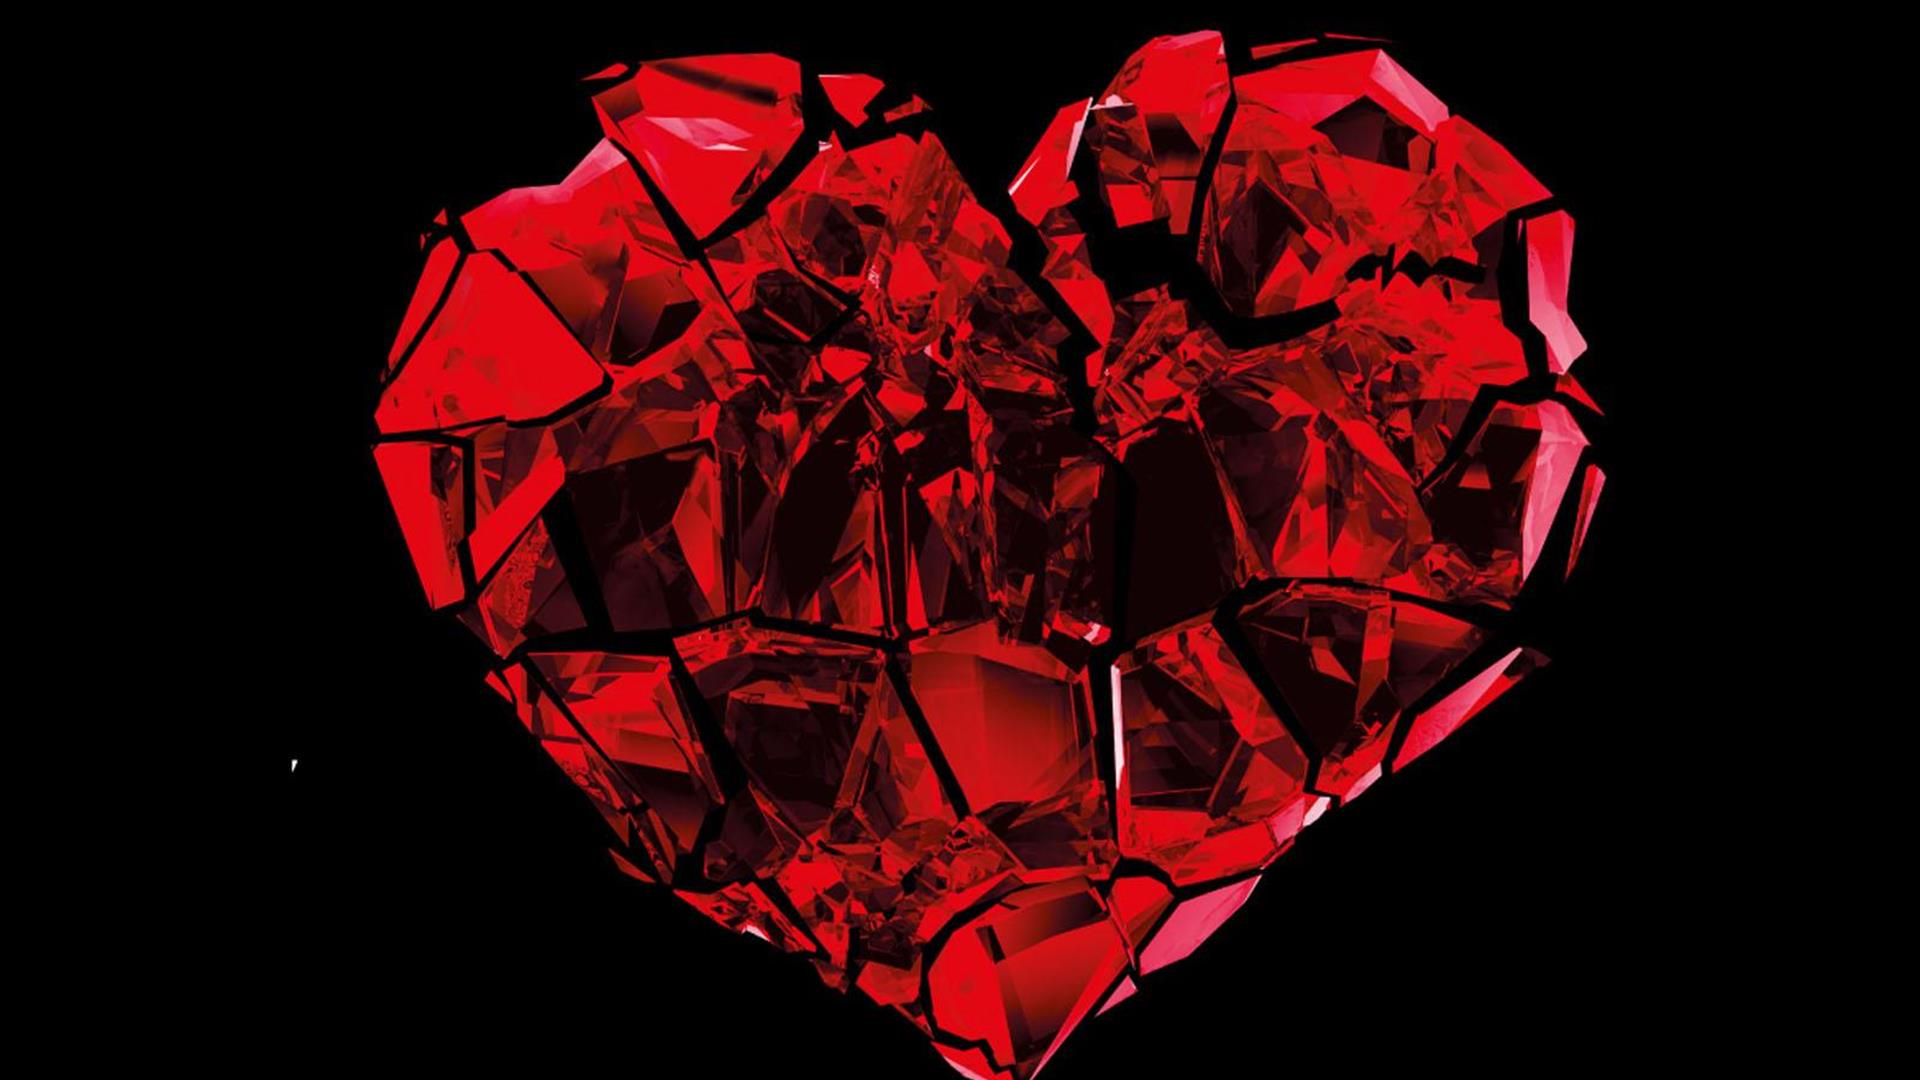 A red Crystalised heart